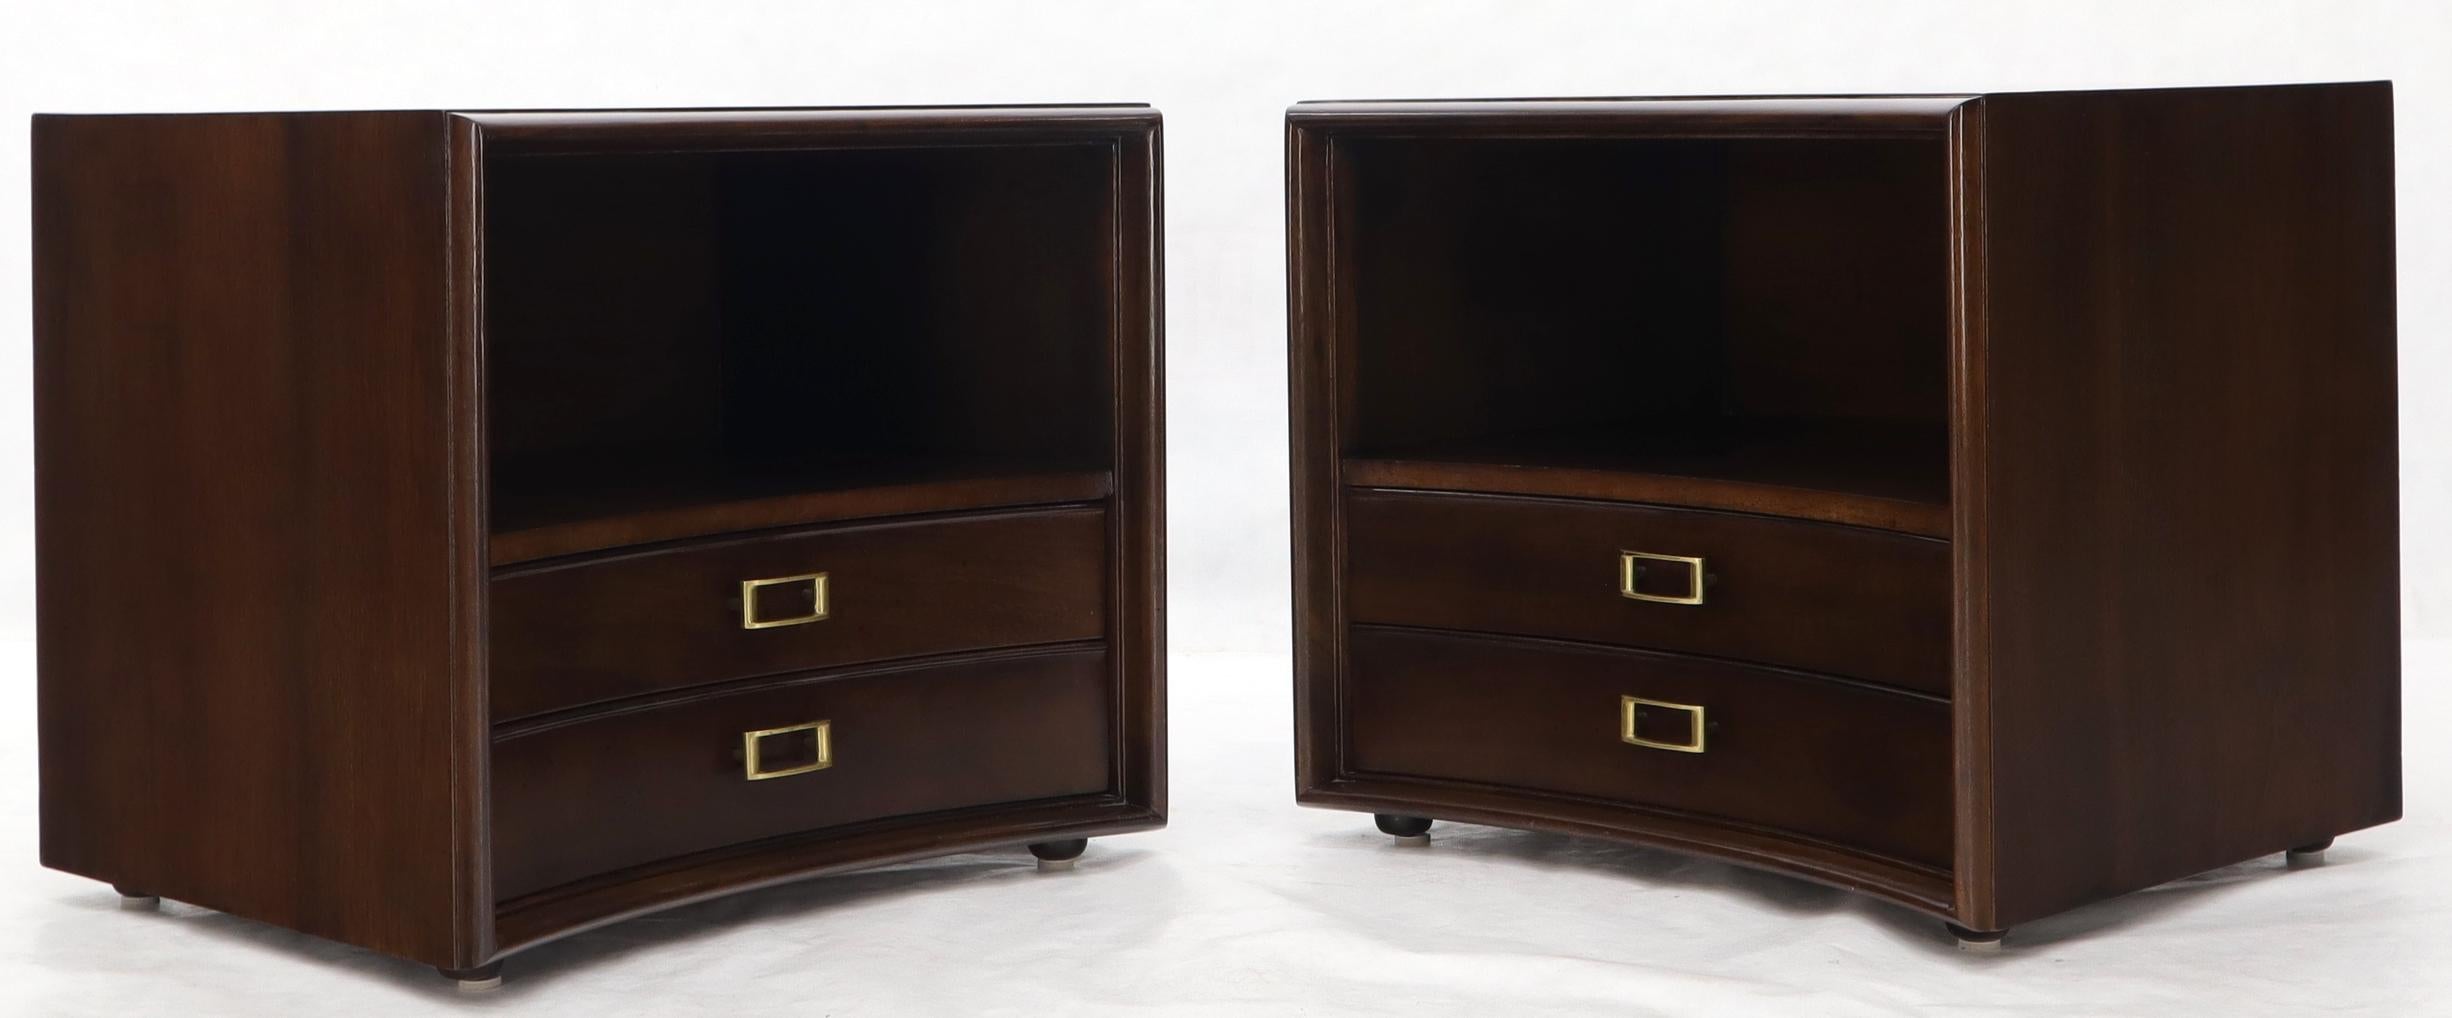 Pair of dark chocolate brown Mid-Century Modern nightstands designed by Paul Frankl for Johnson Furniture. Stunning mint condition, beautiful finish pair.